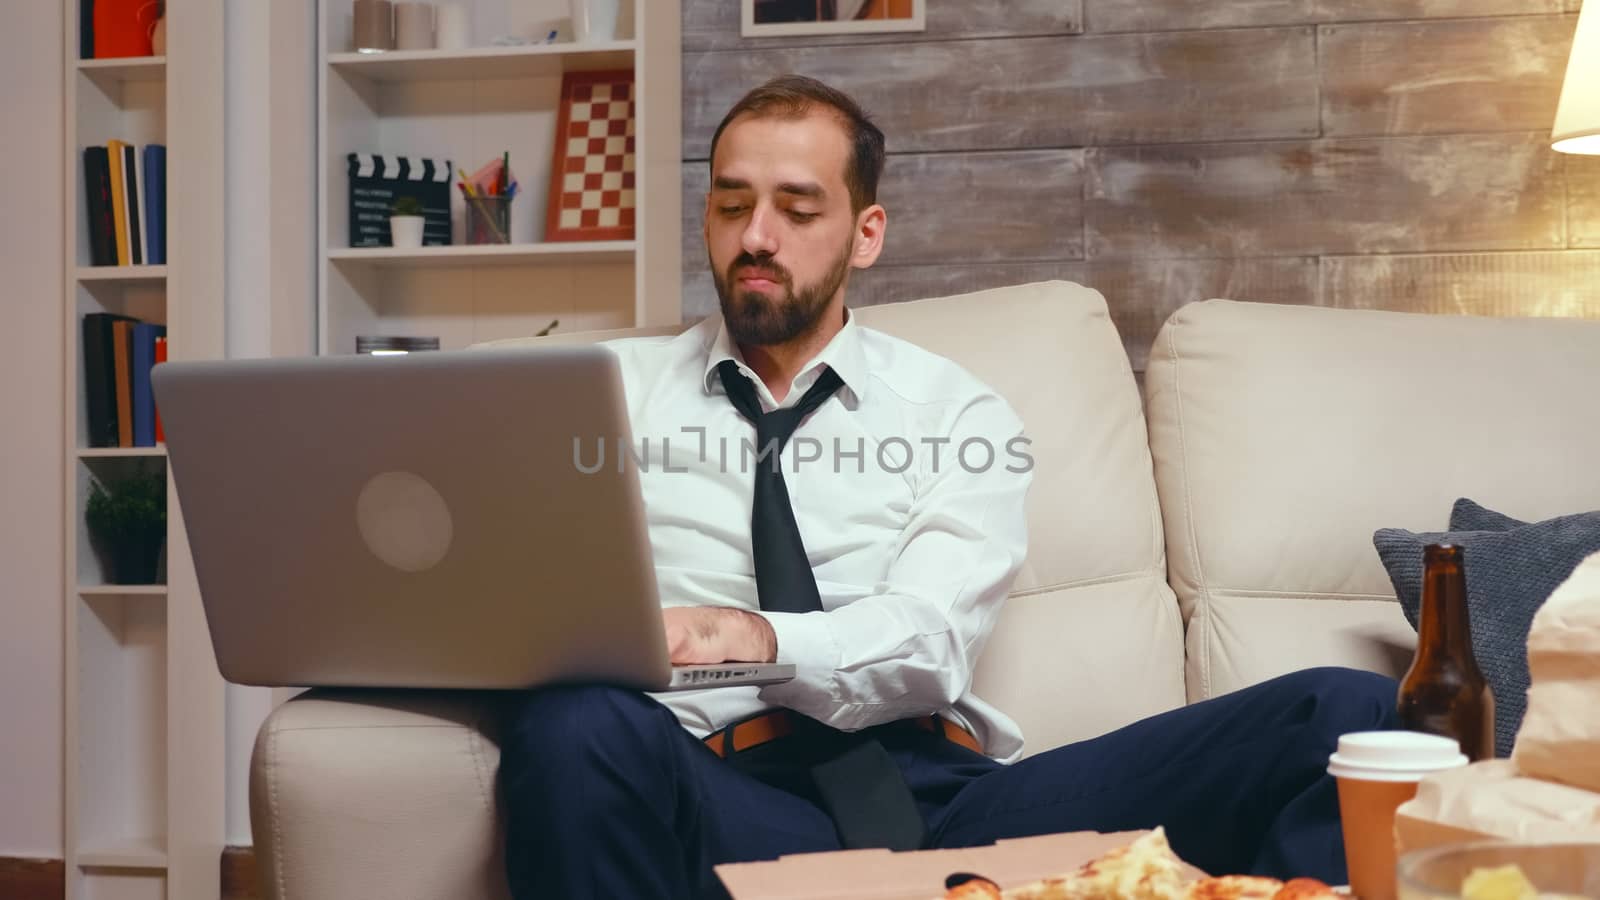 Tired businessman in living room working on laptop and eating pizza. Entrepreneur wearing a tie.